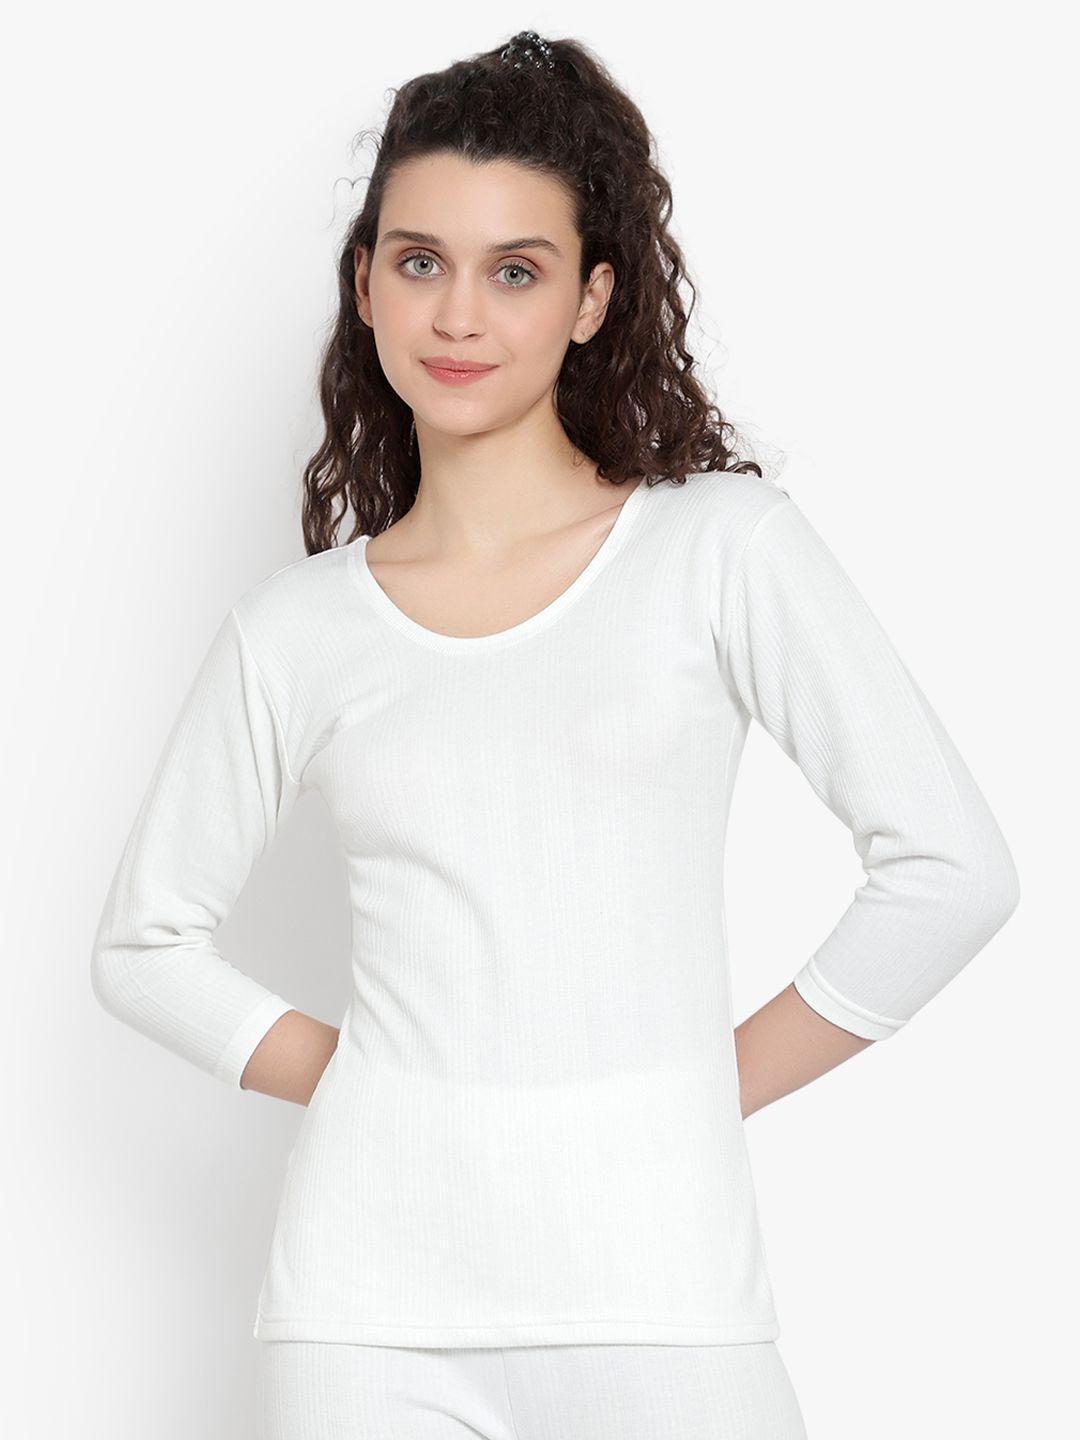 sky heights women white cotton thermal tops